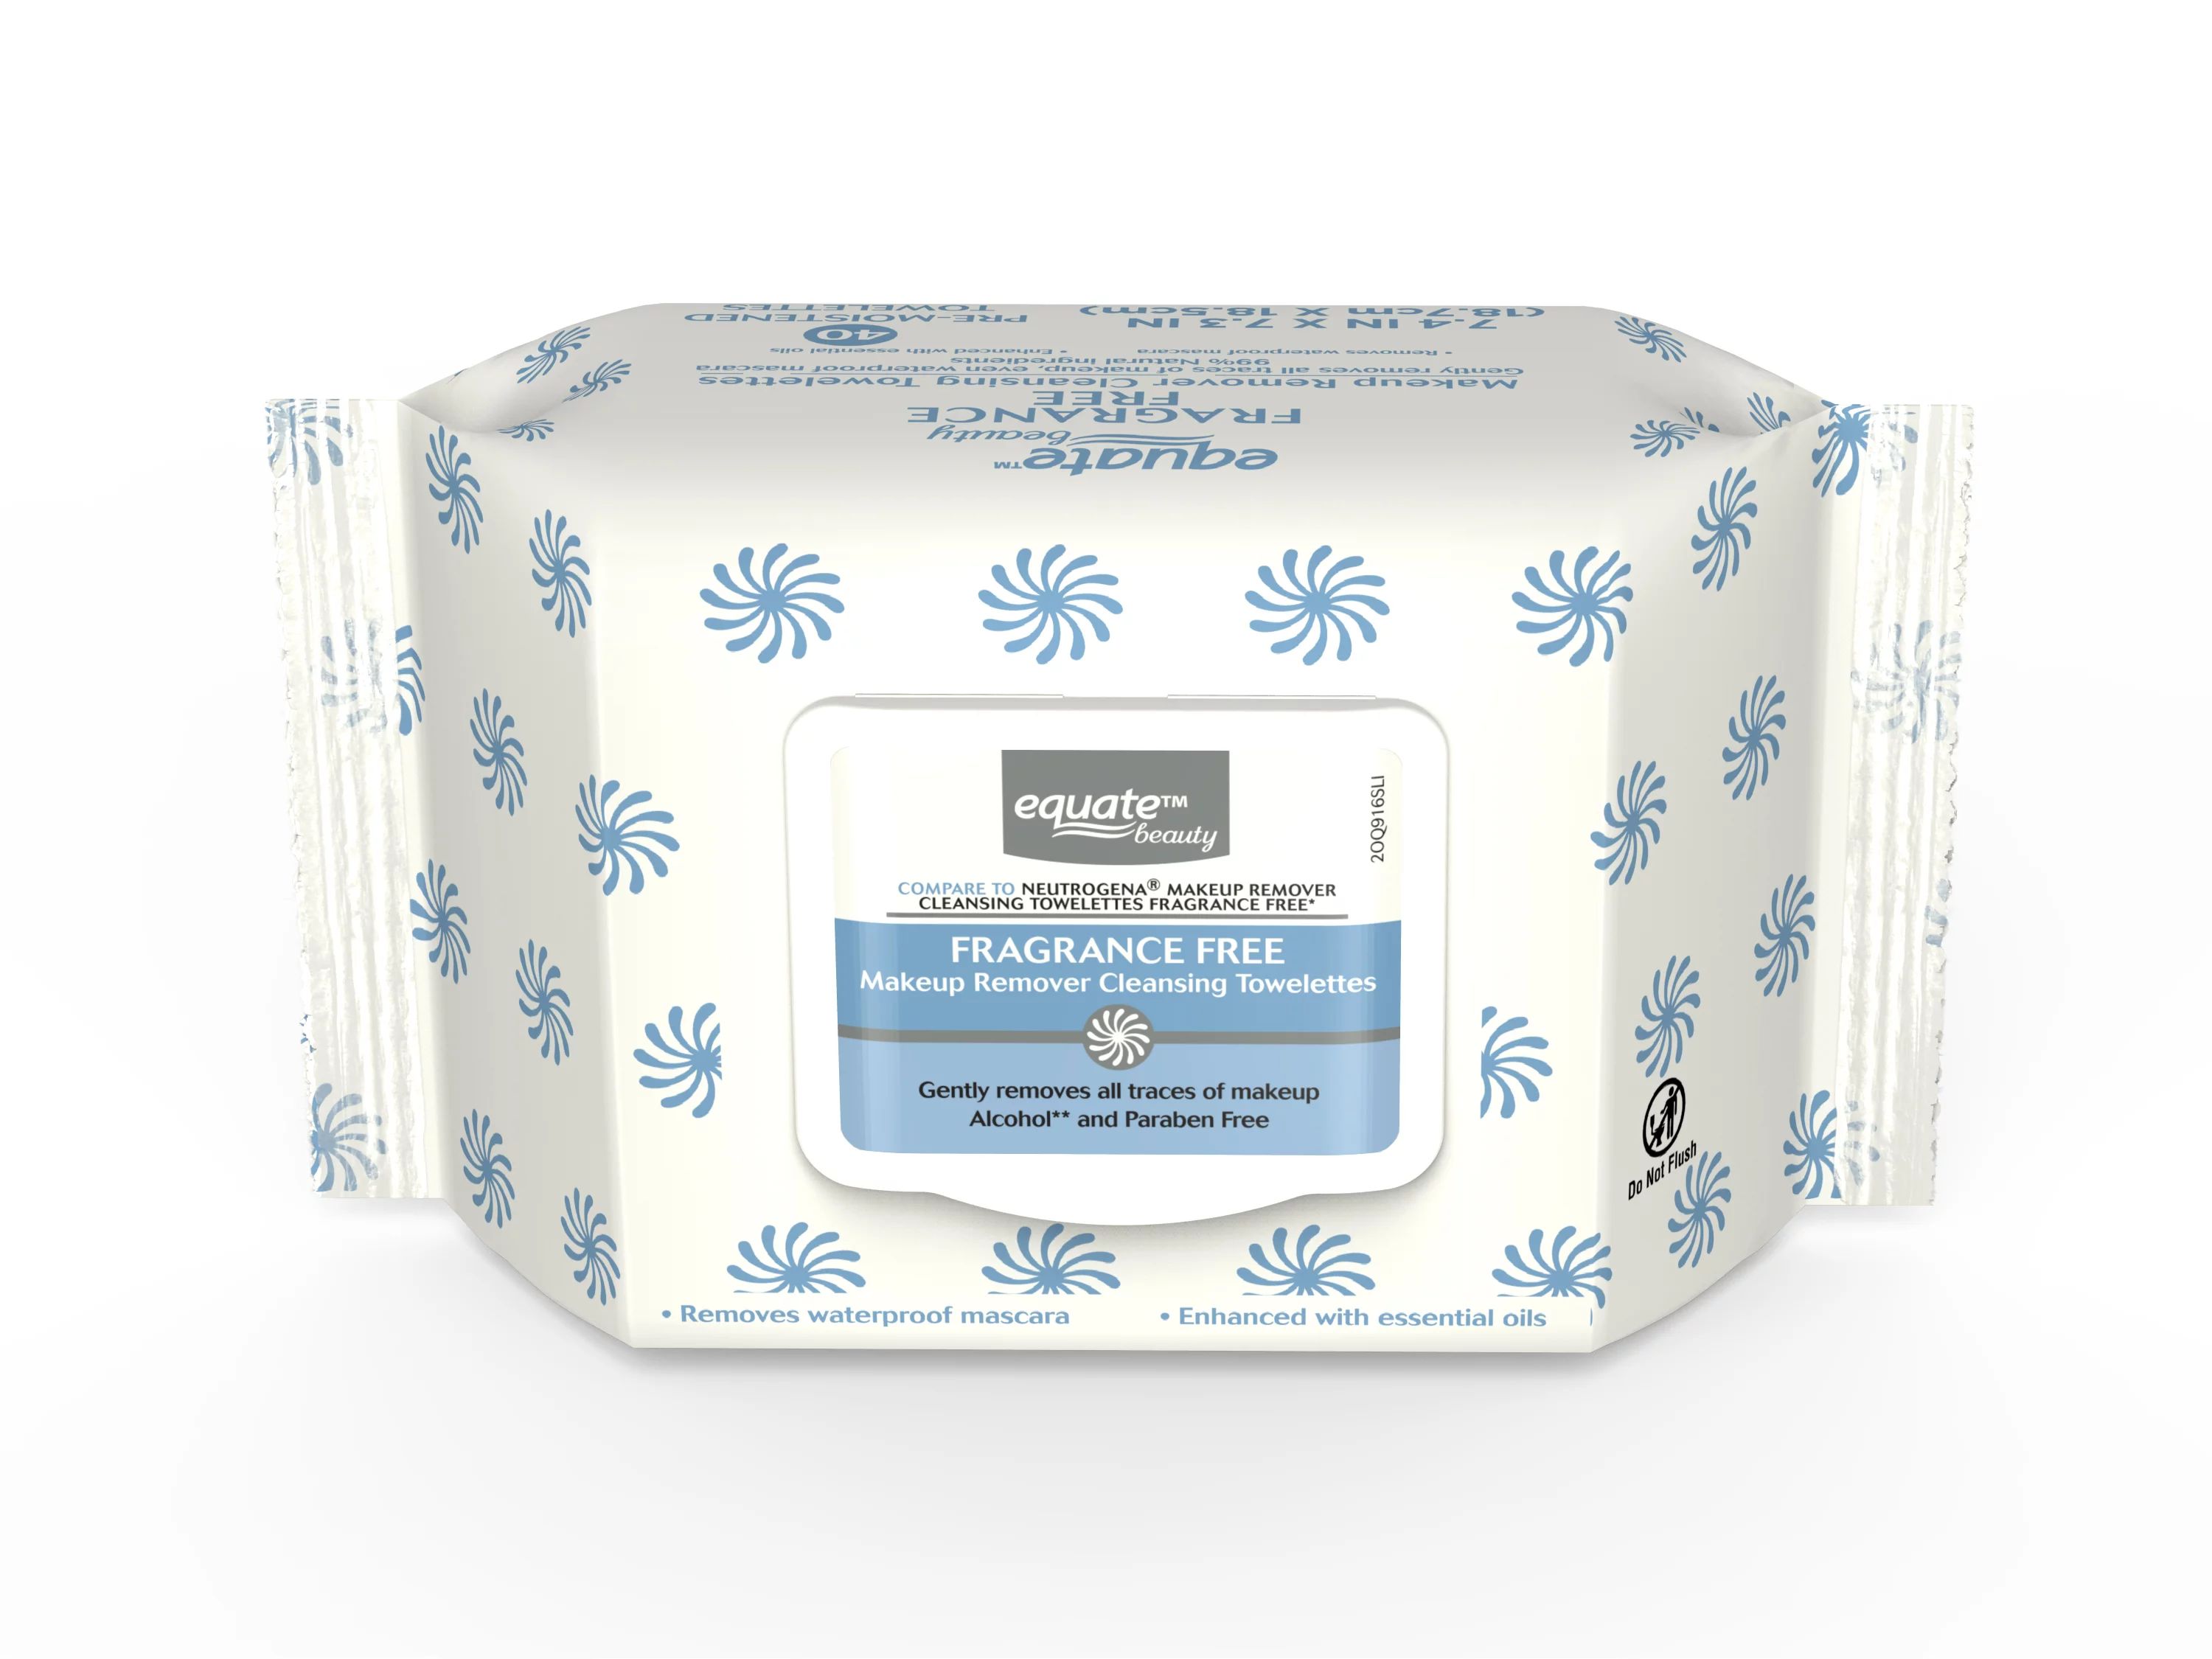 Equate Beauty Fragrance Free Makeup Remover Cleansing Towelettes, 40 Towelettes | Walmart (US)